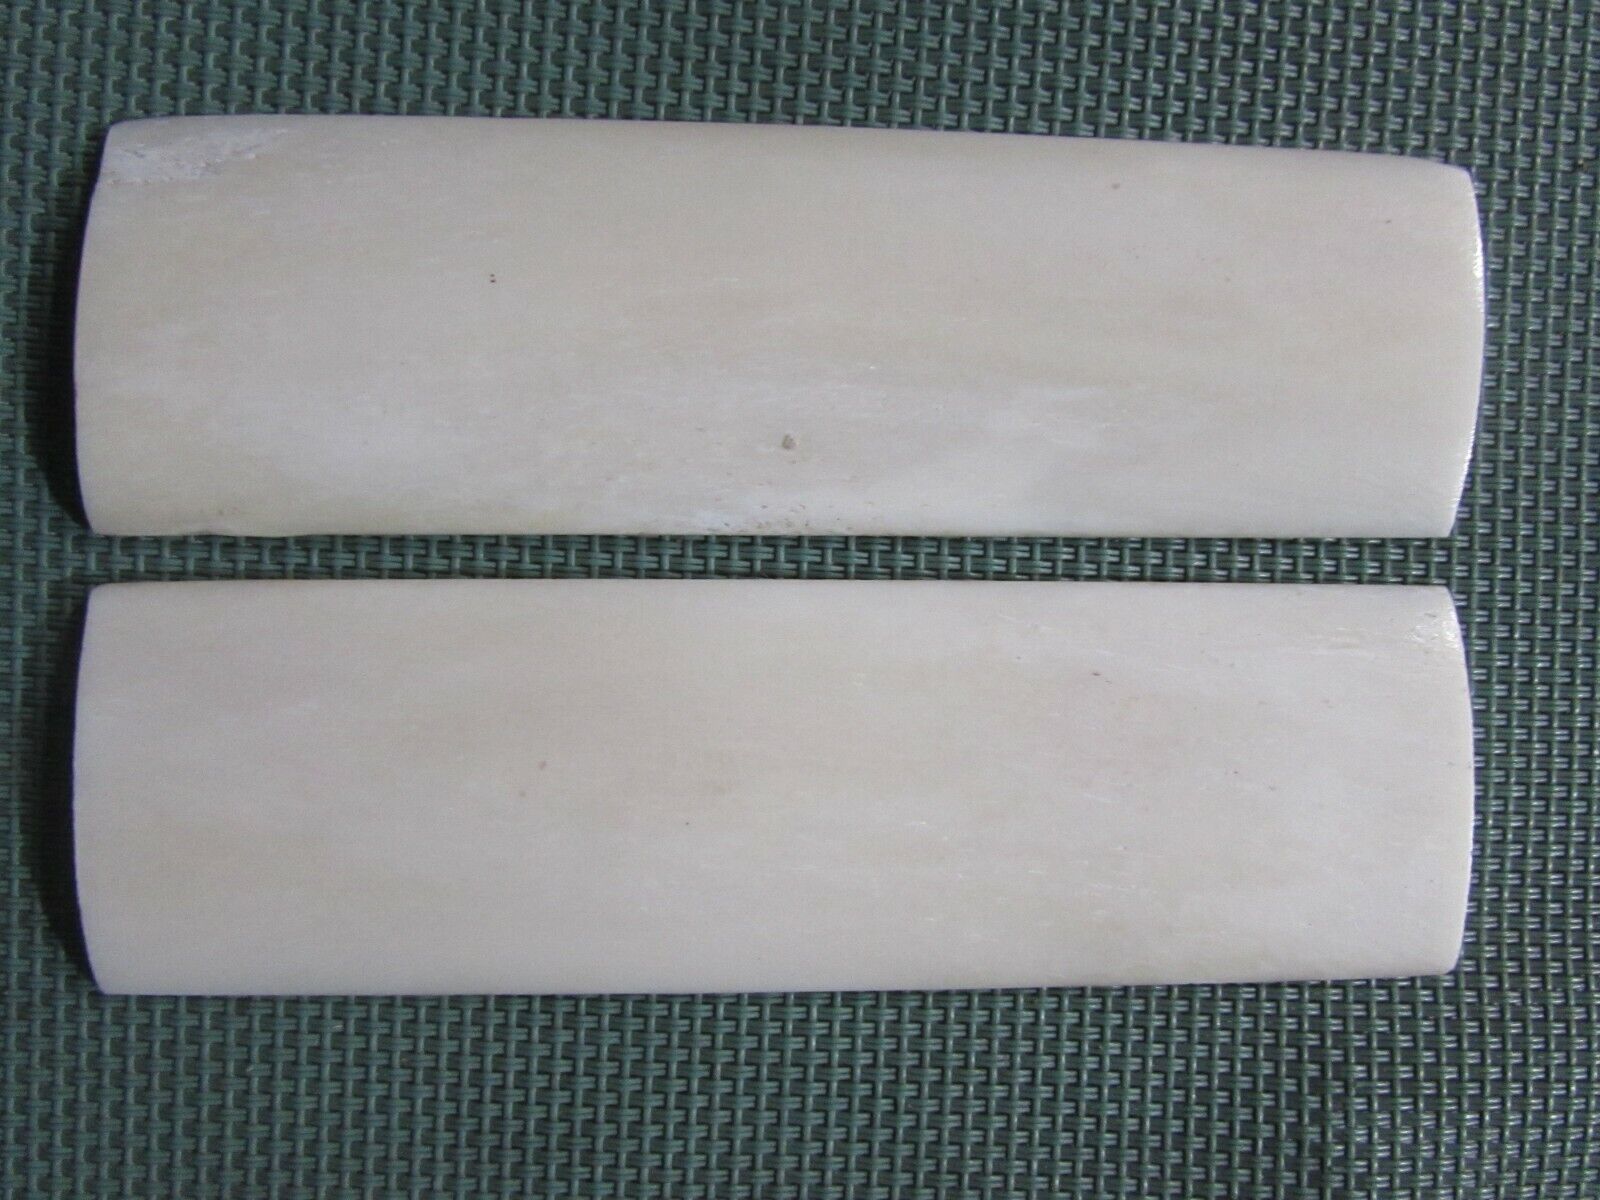  Two 5 in. Smooth Camel Bone knife scales handles plates  lot - 204